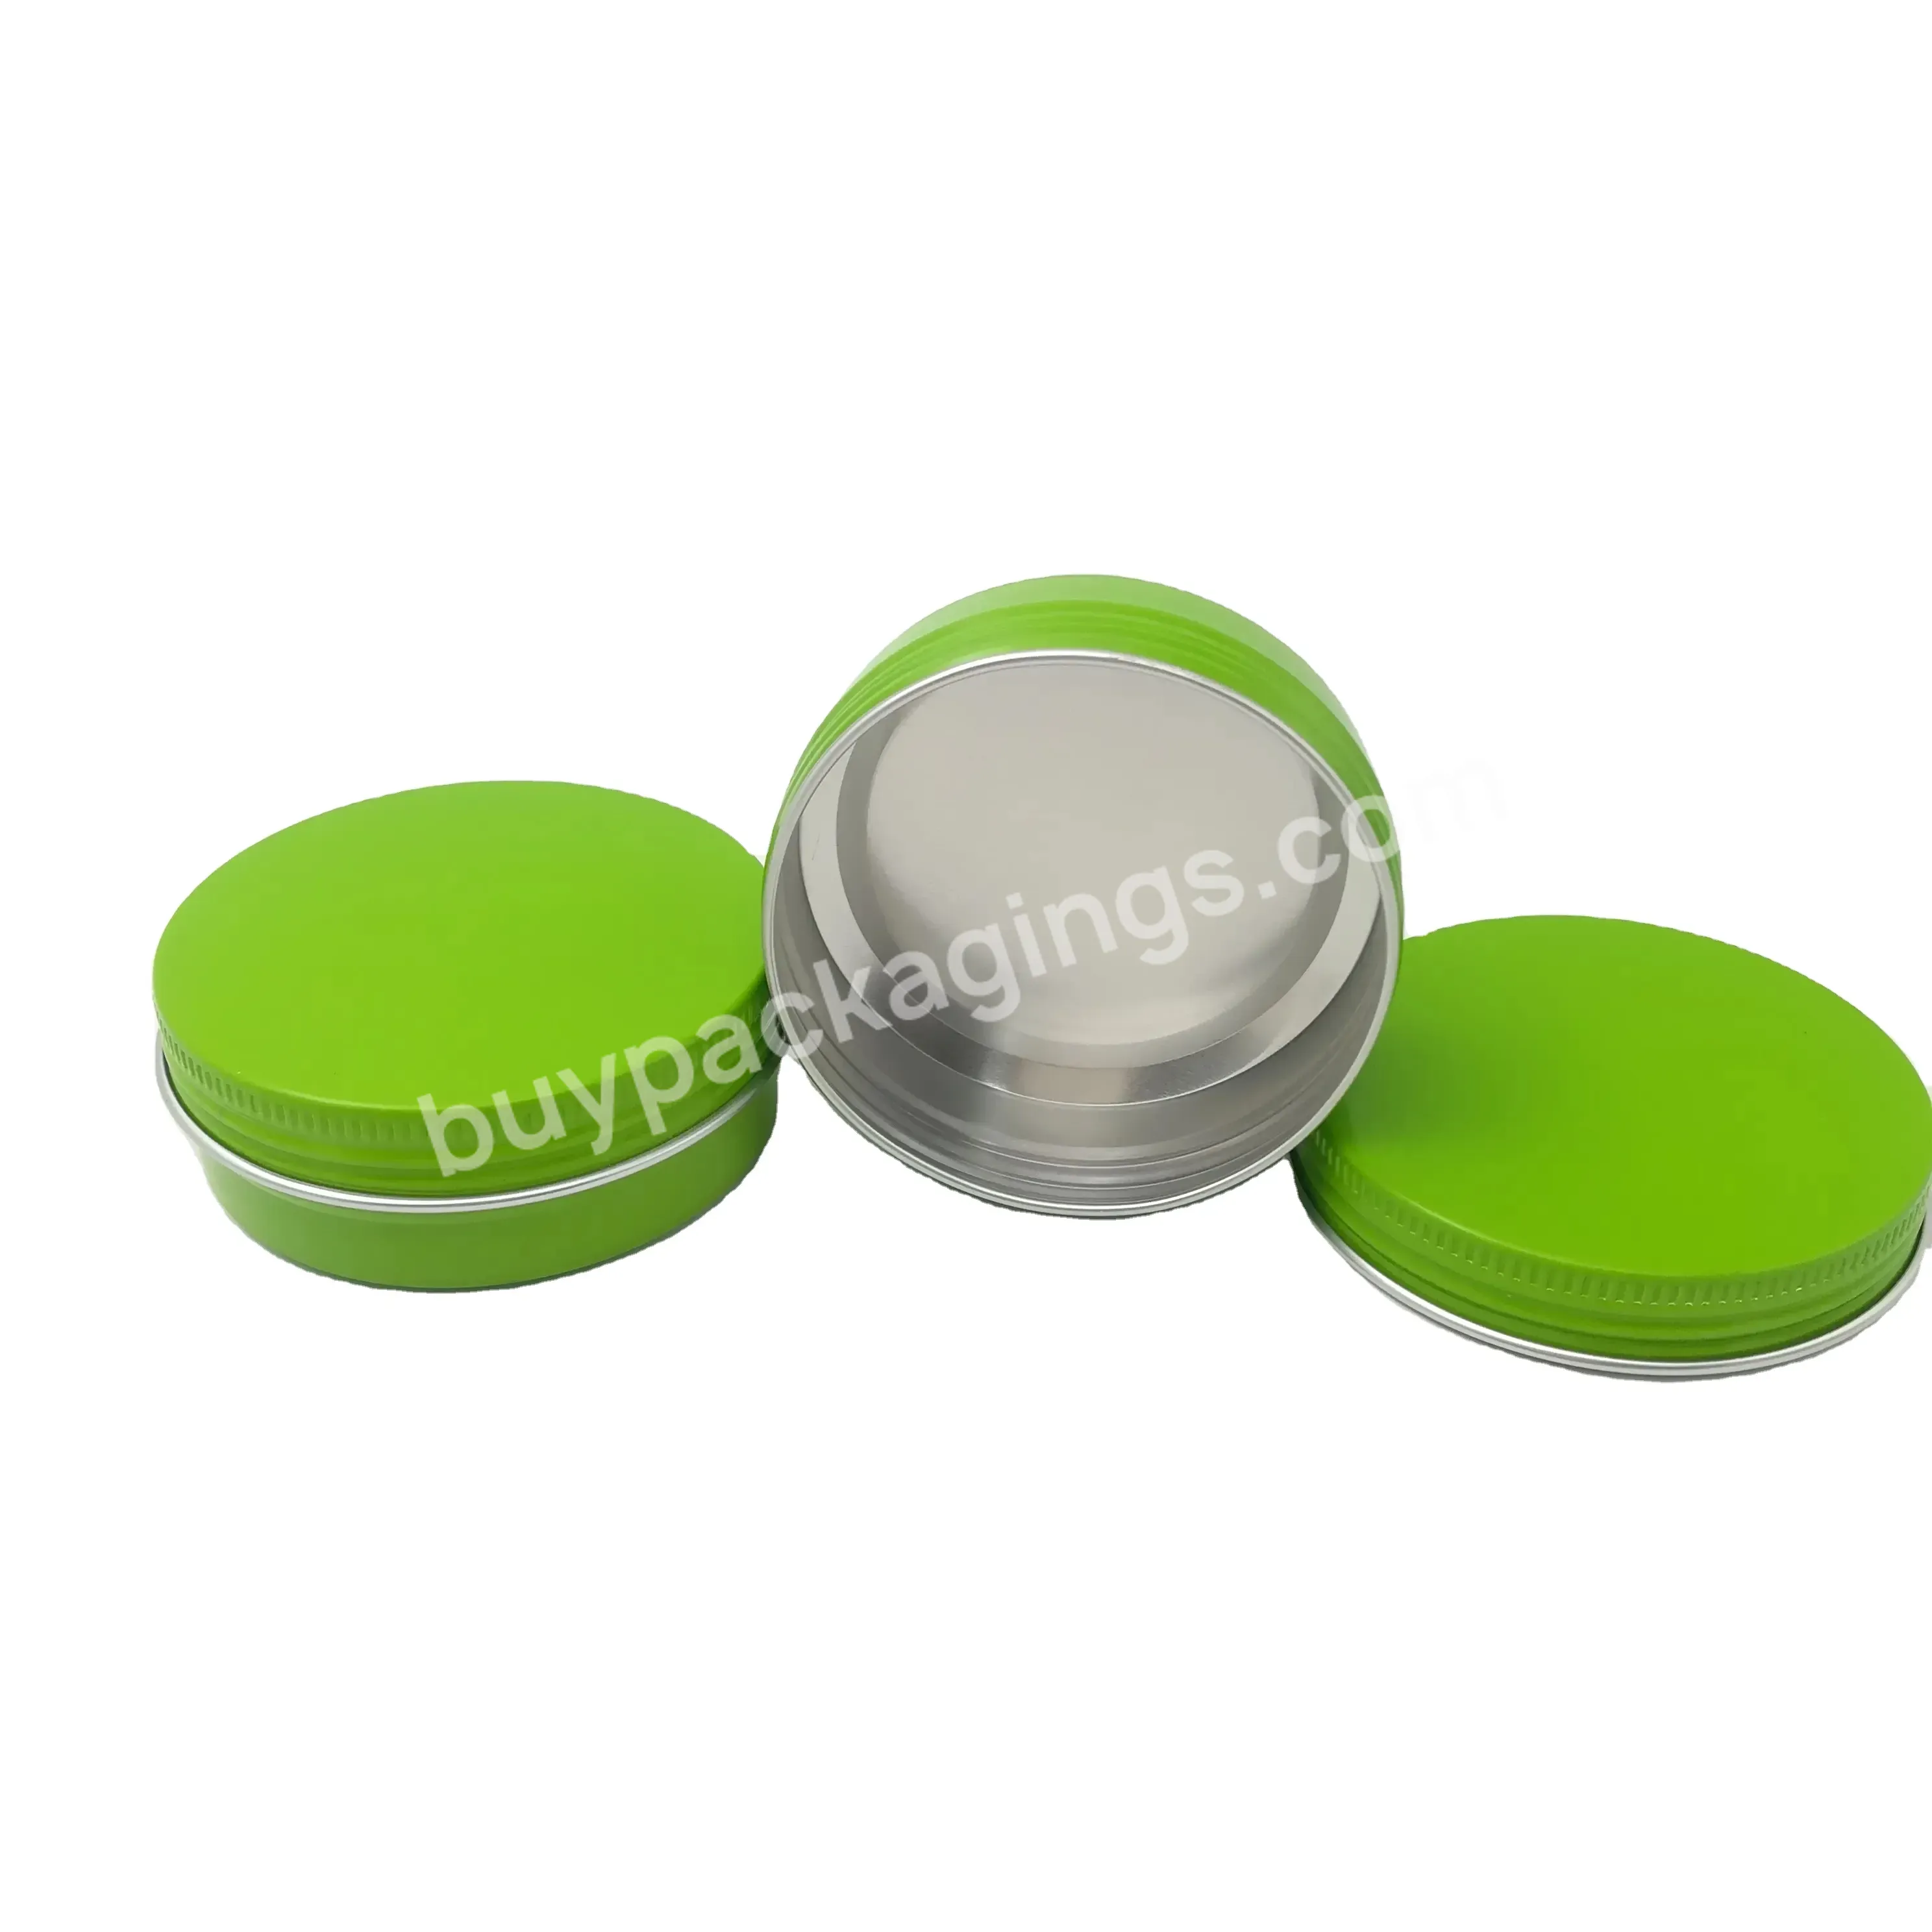 Aluminum Boxes With Green Screw Lid Cover For Sunscreen Round Cosmetic Lip Balm Tin Jars Salves Containers